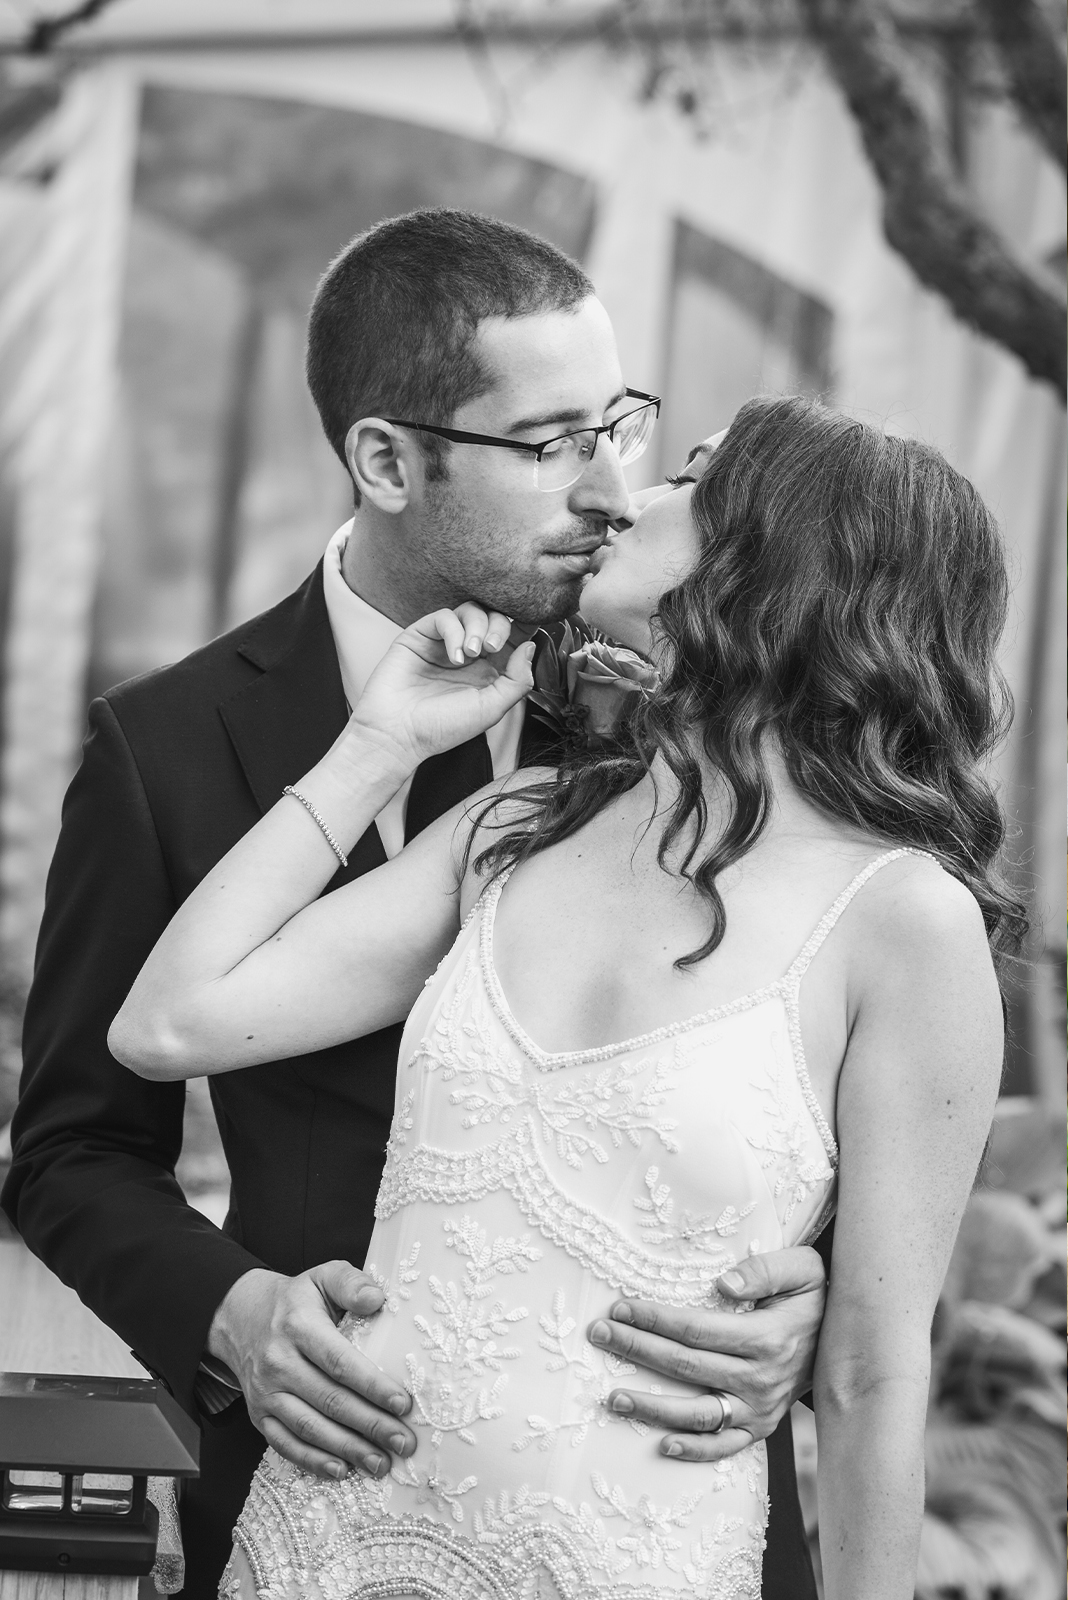 Bride and groom wedding portrait, couple portrait, cute pose, cute couple pose, cute bride and groom pose, kiss, black and white, classy wedding ceremony at Landerhaven, Mayfield Heights OH